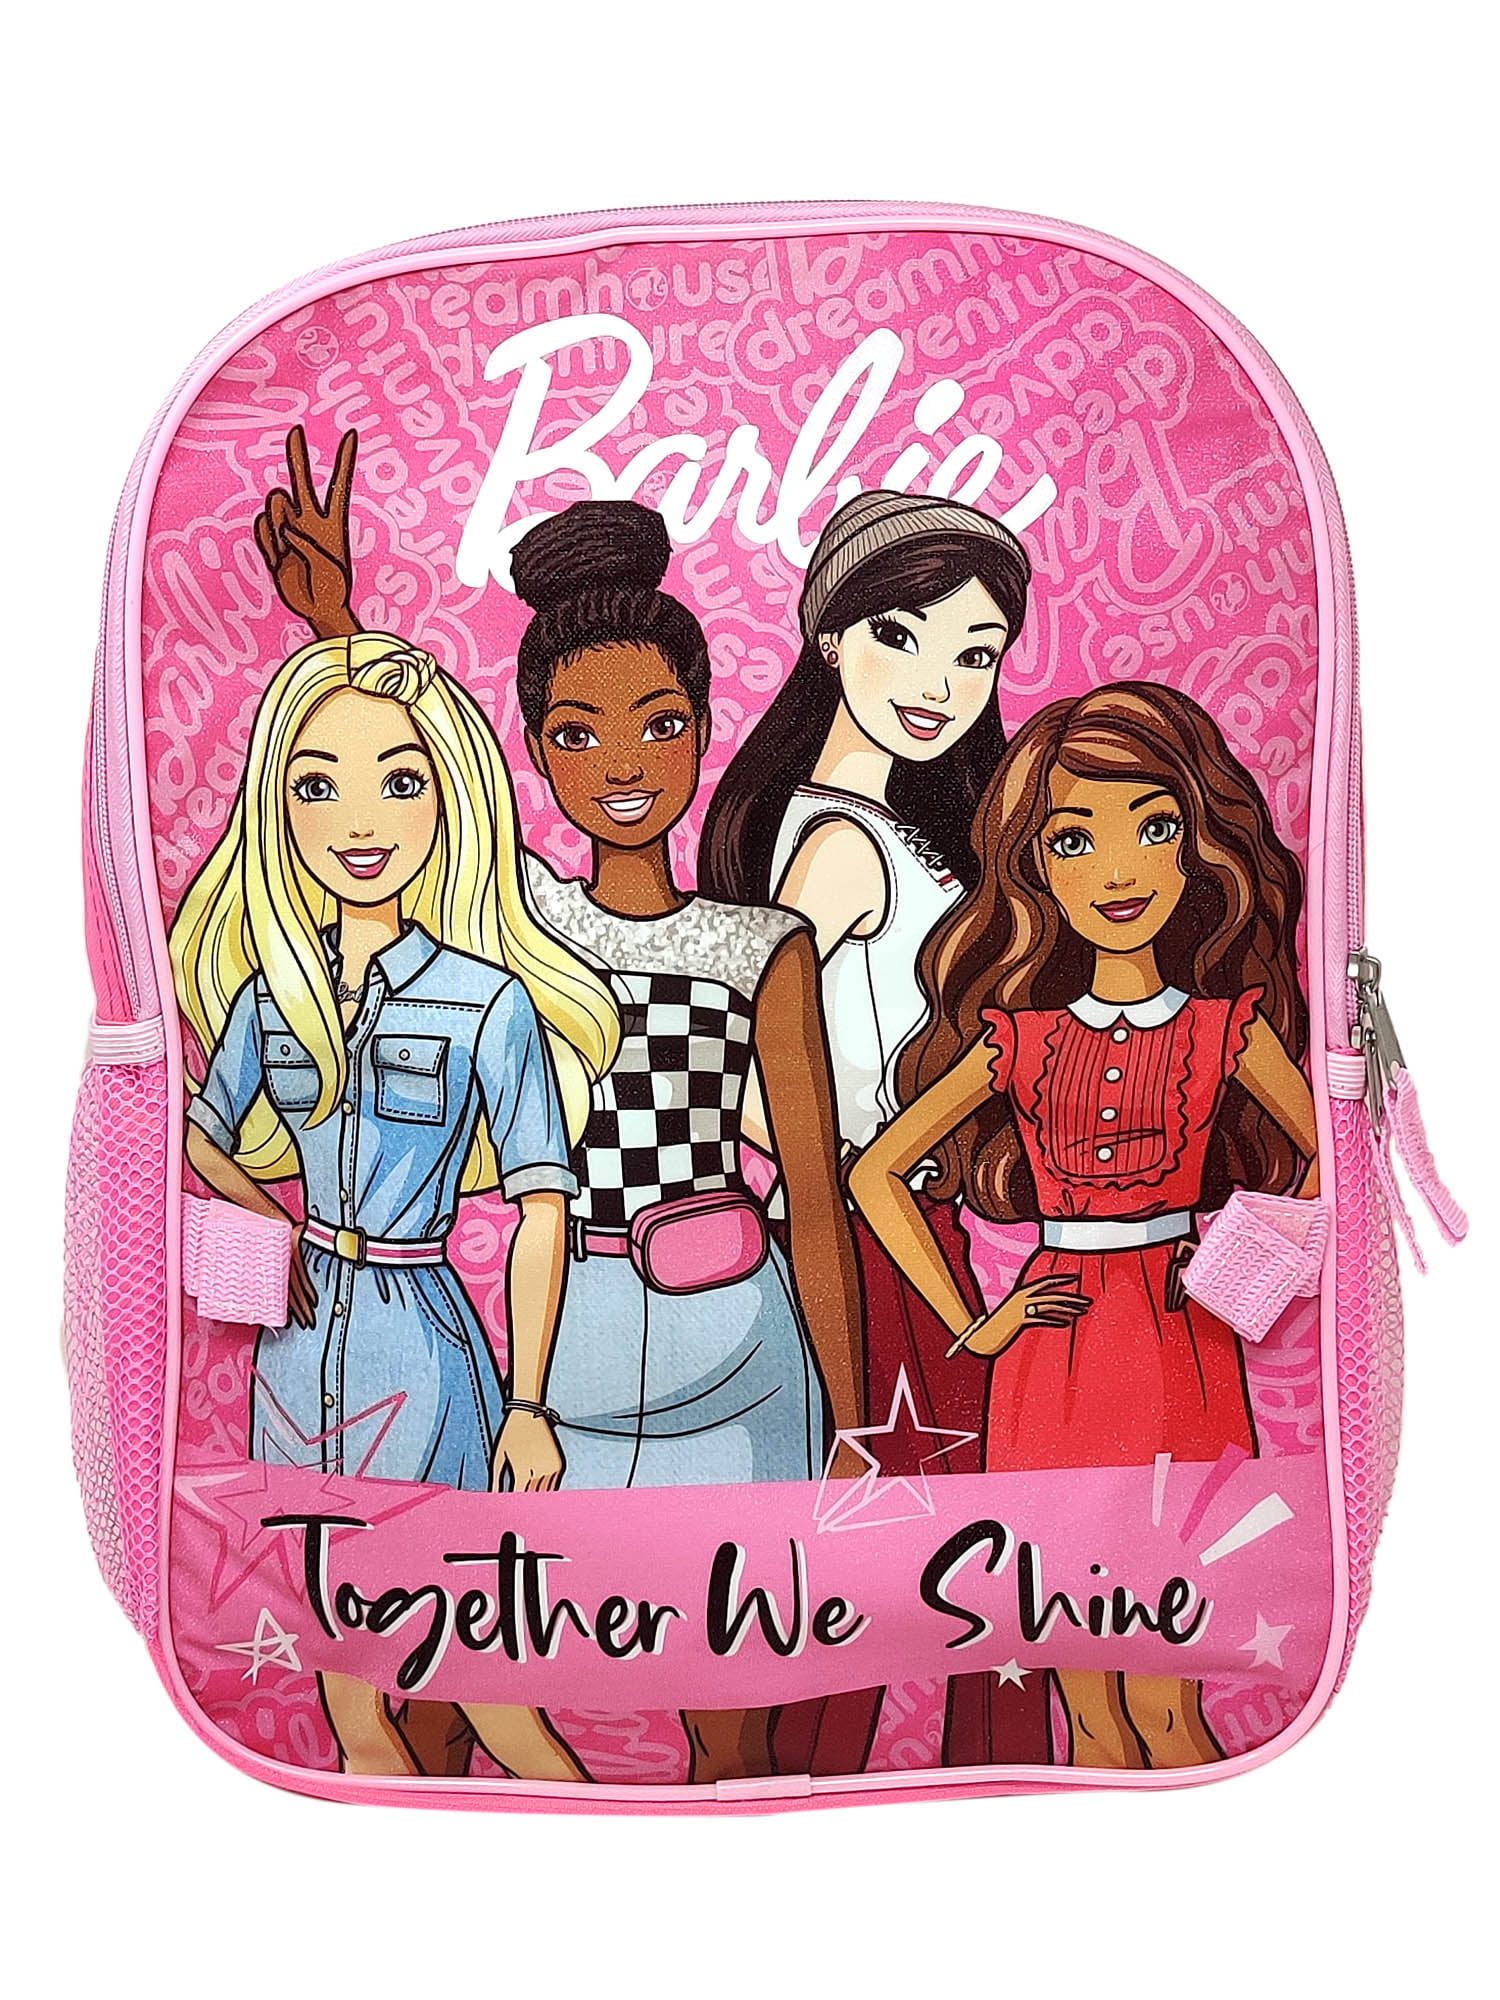 Barbie Kids Lunch Bag, Insulated Lunch Bag, Barbie Gifts for Girls